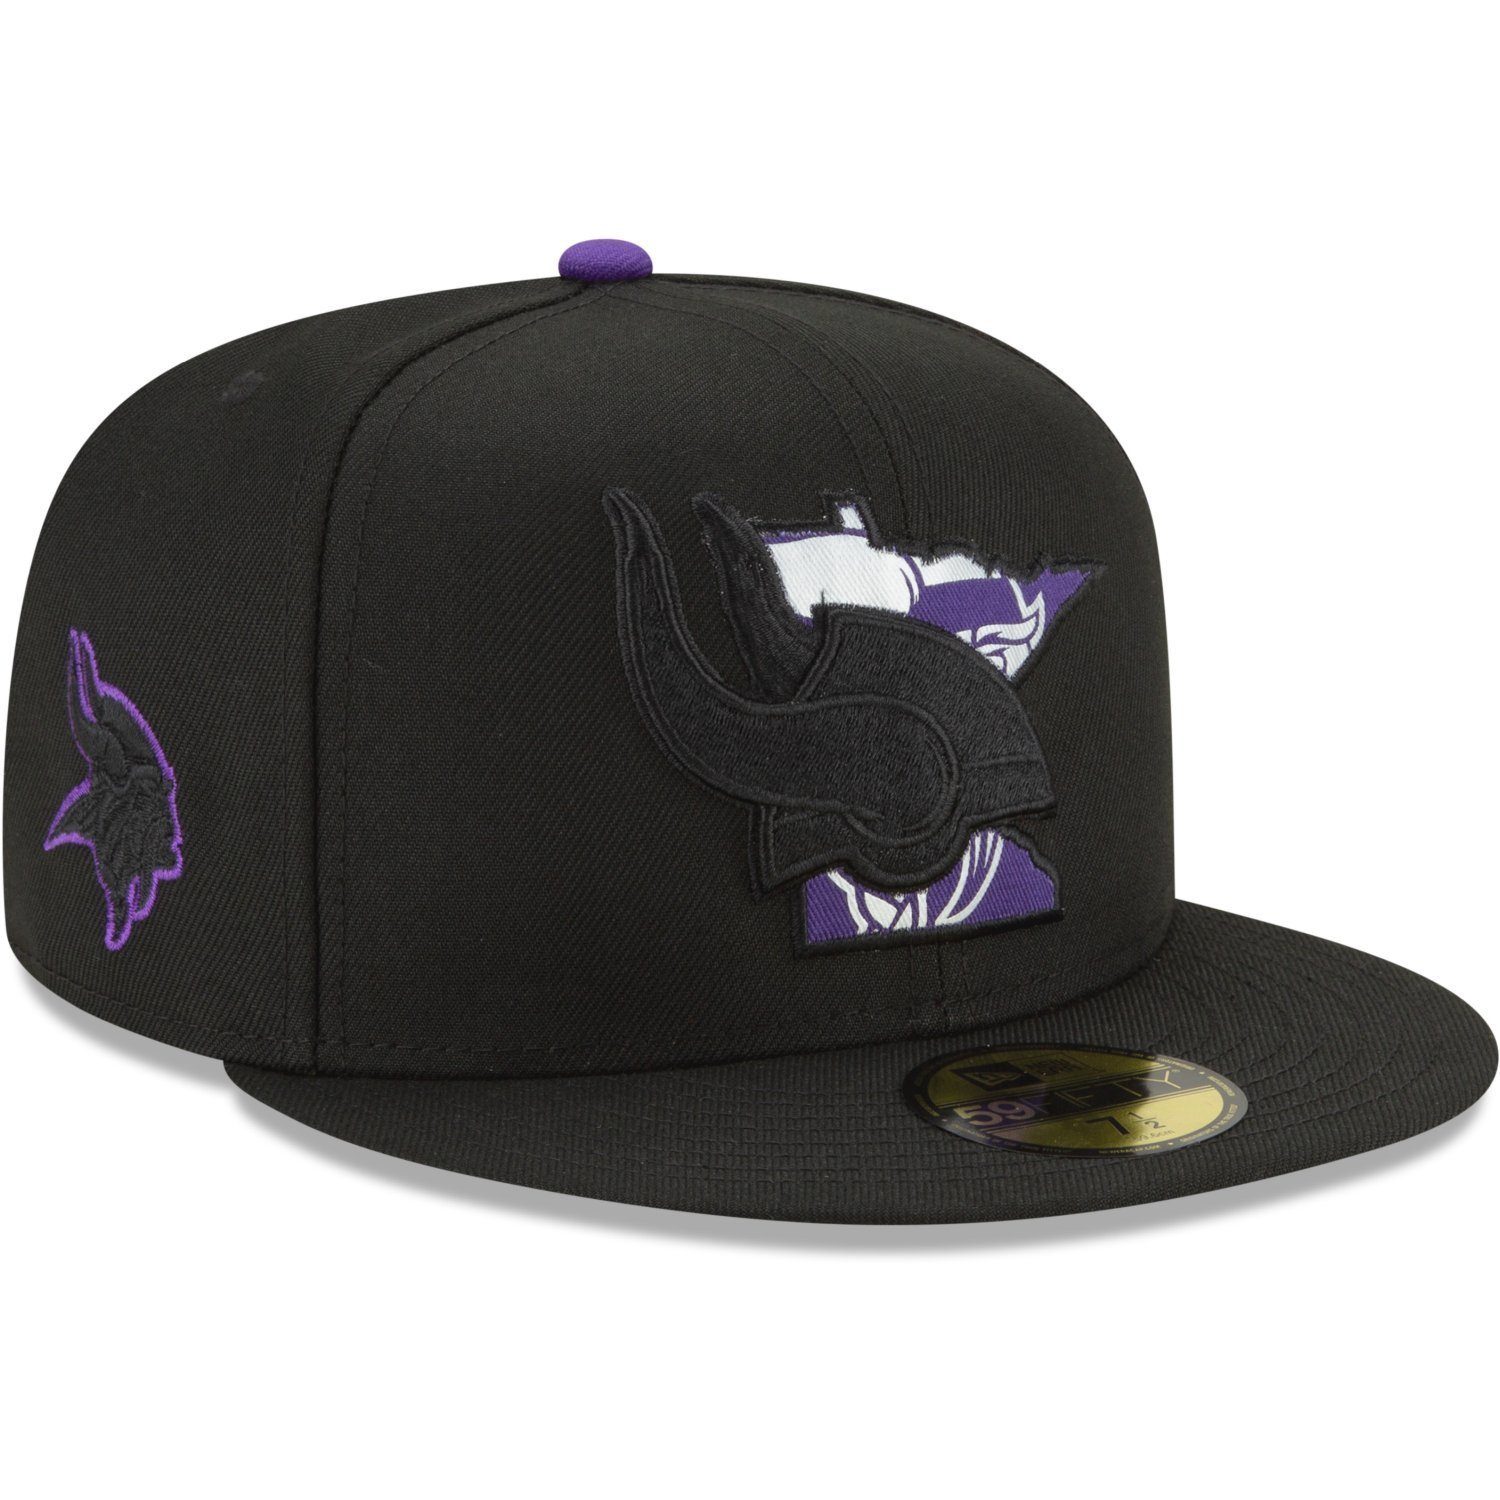 New Era Fitted Cap 59Fifty STATE LOGO NFL Teams Minnesota Vikings